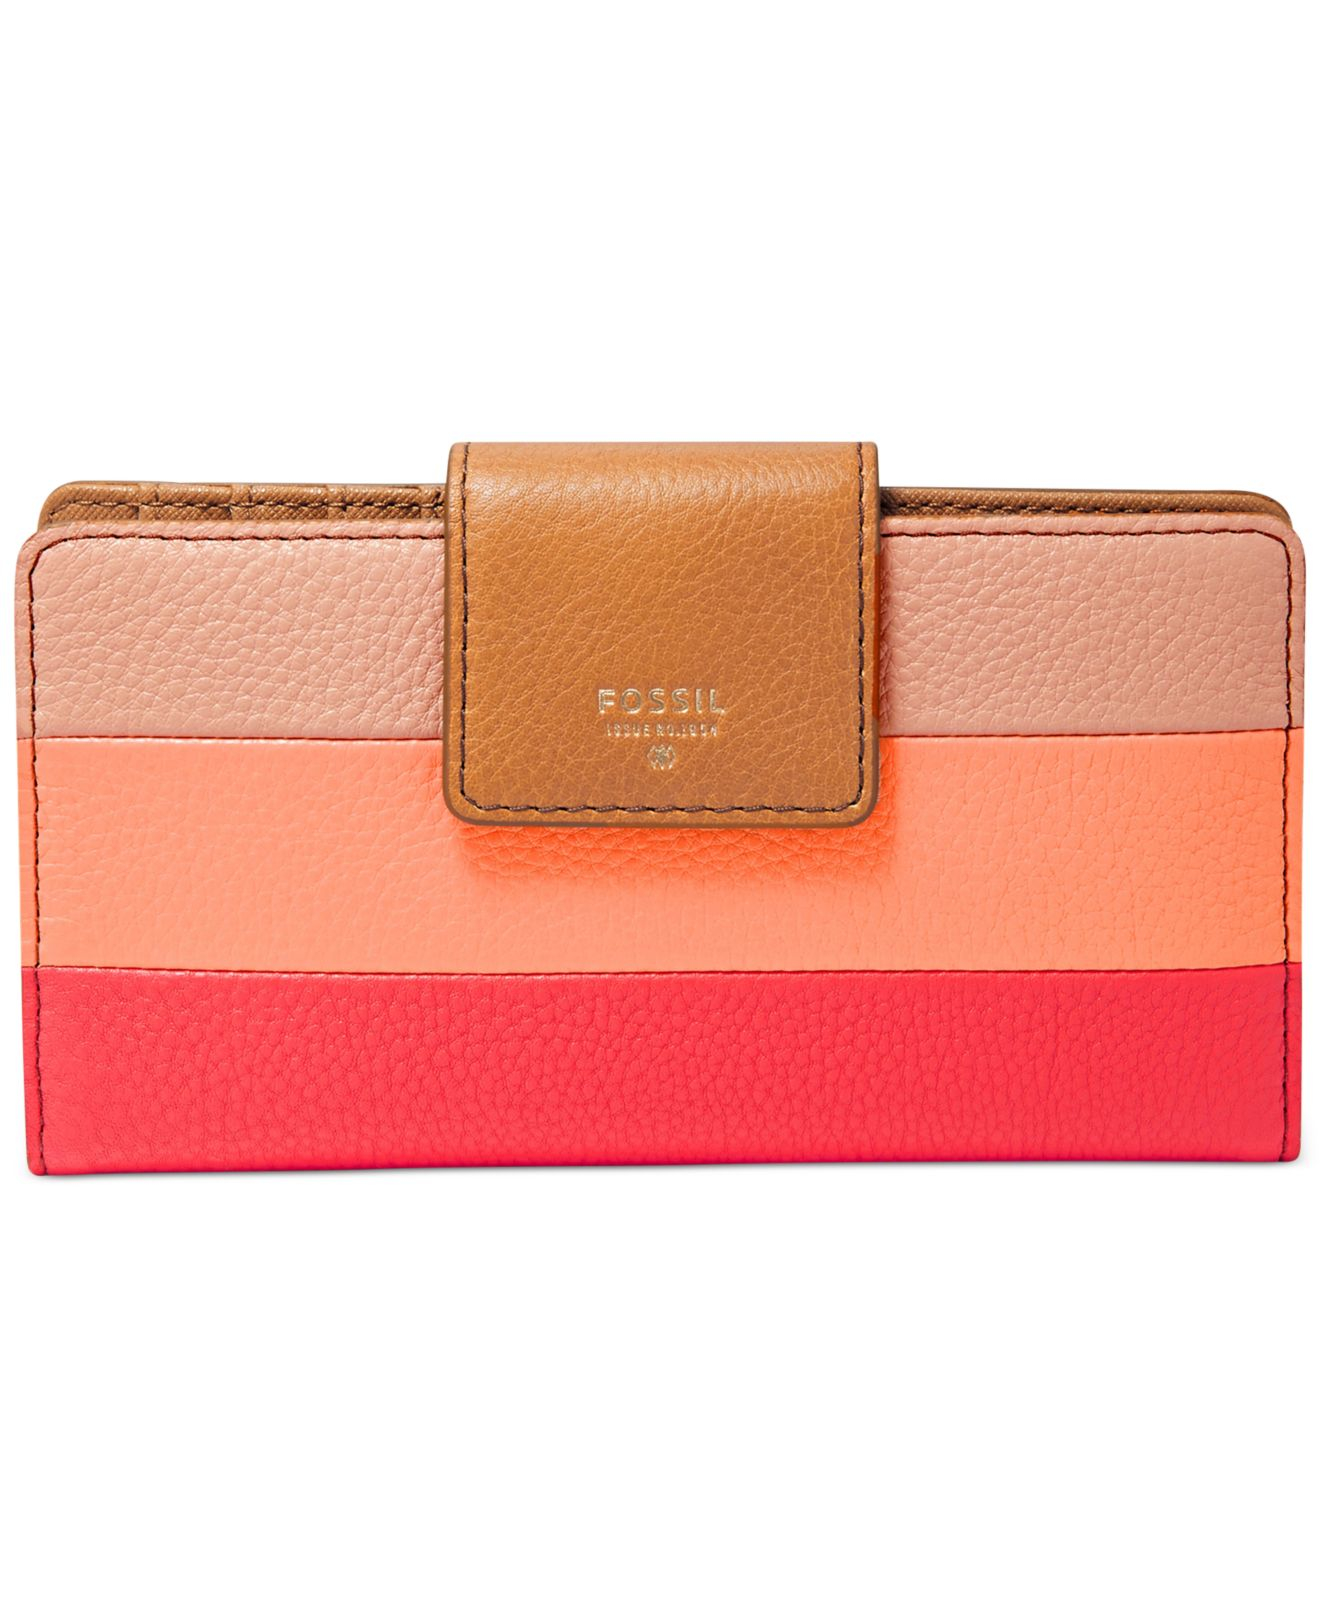 Fossil Sydney Leather Patchwork Tab Wallet in Pink (Pink Stripe) | Lyst